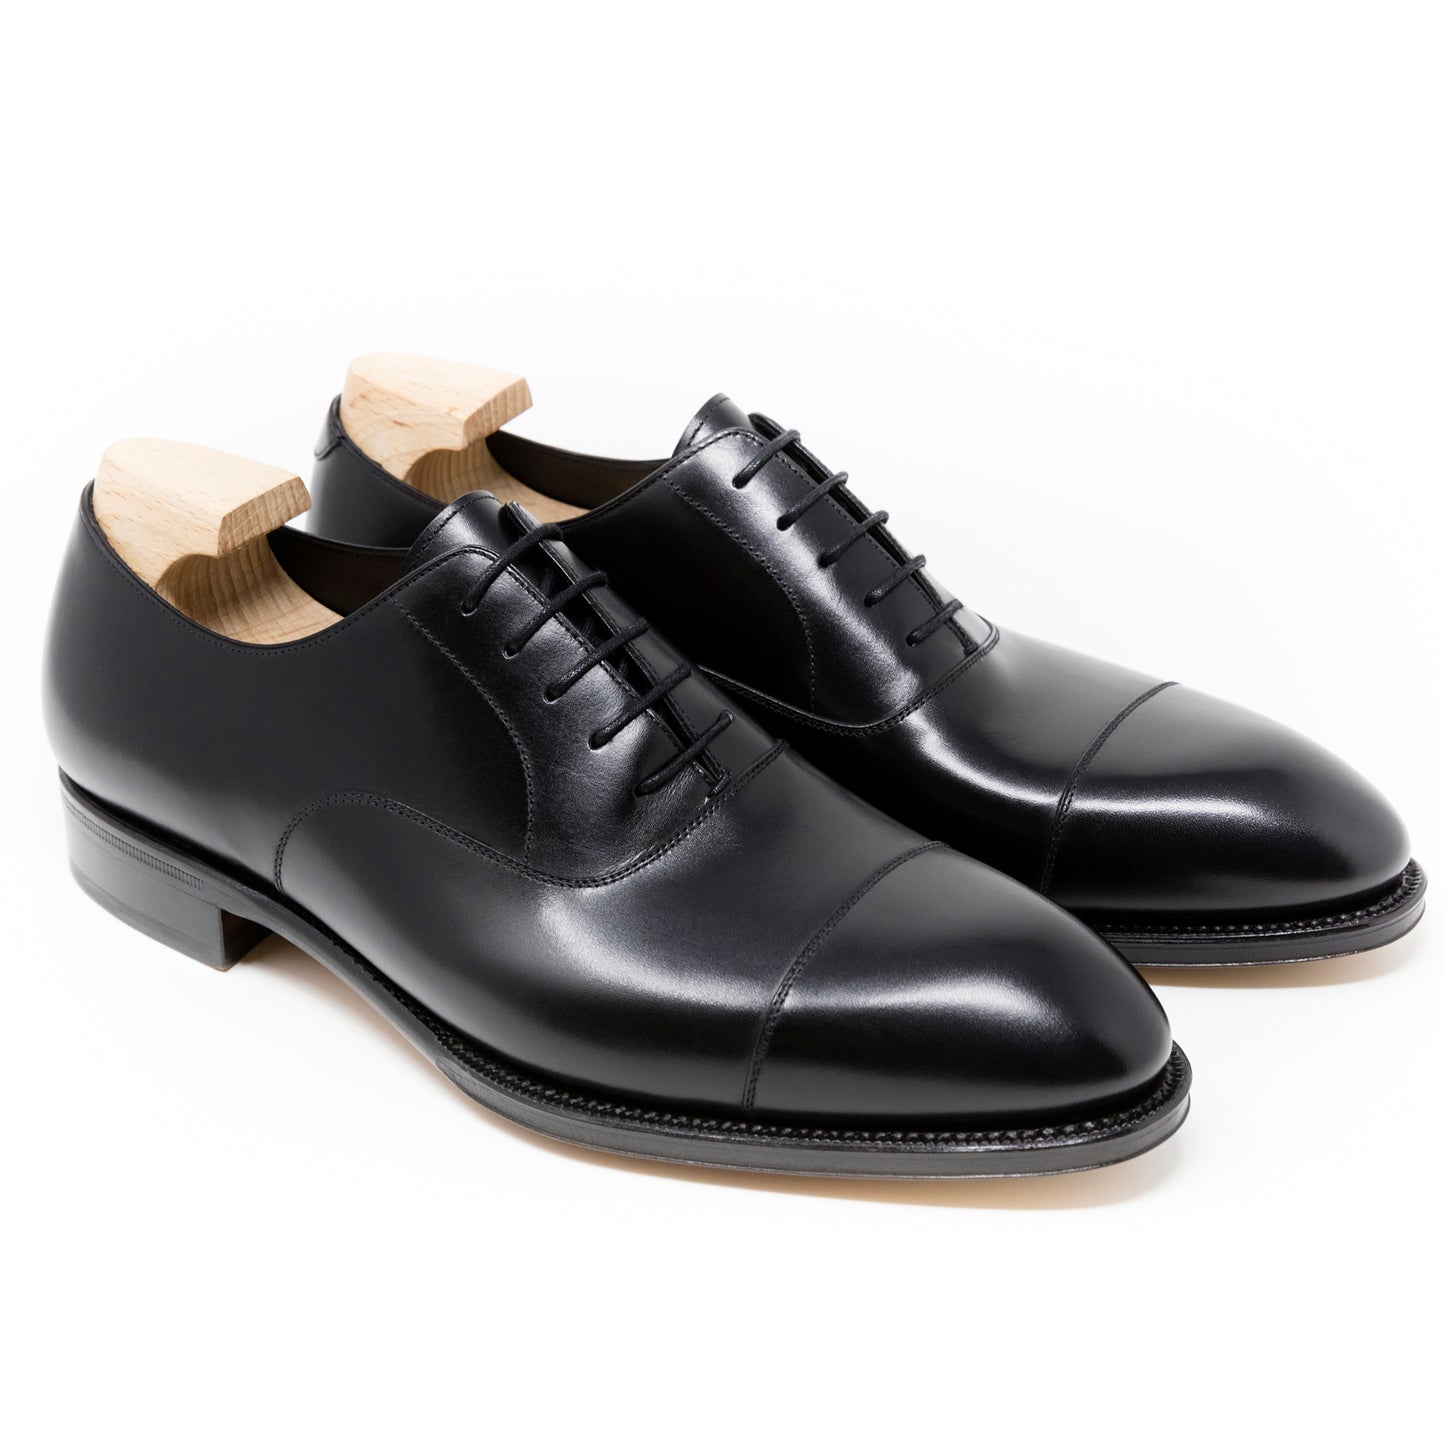 TLB Mallorca leather shoes 516 / OLIVER / BOXCALF BLACK